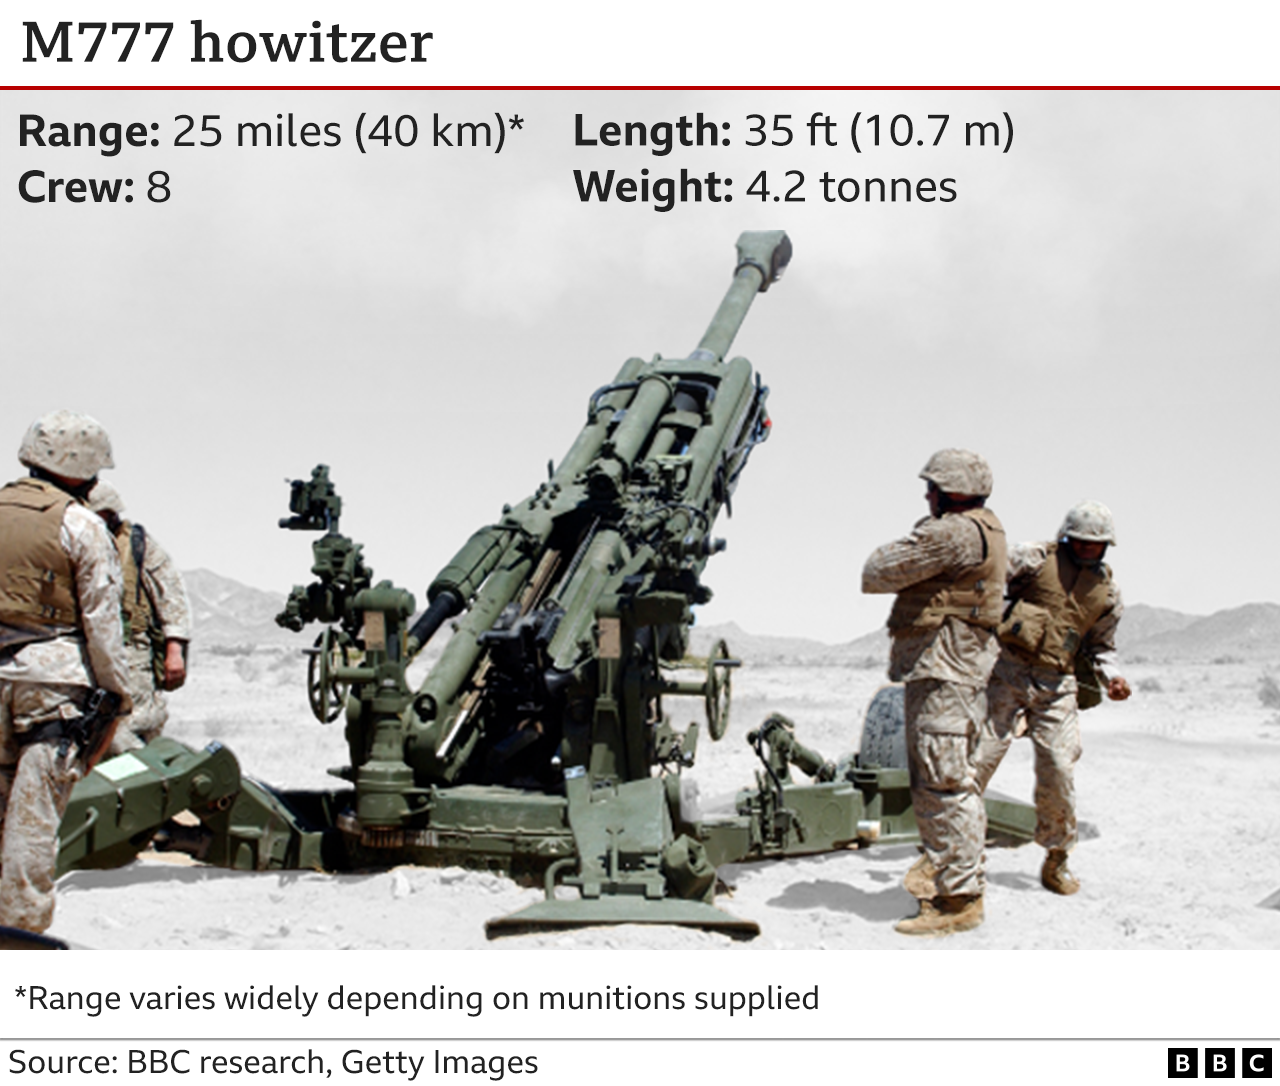 Graphic showing details of M777 artillery